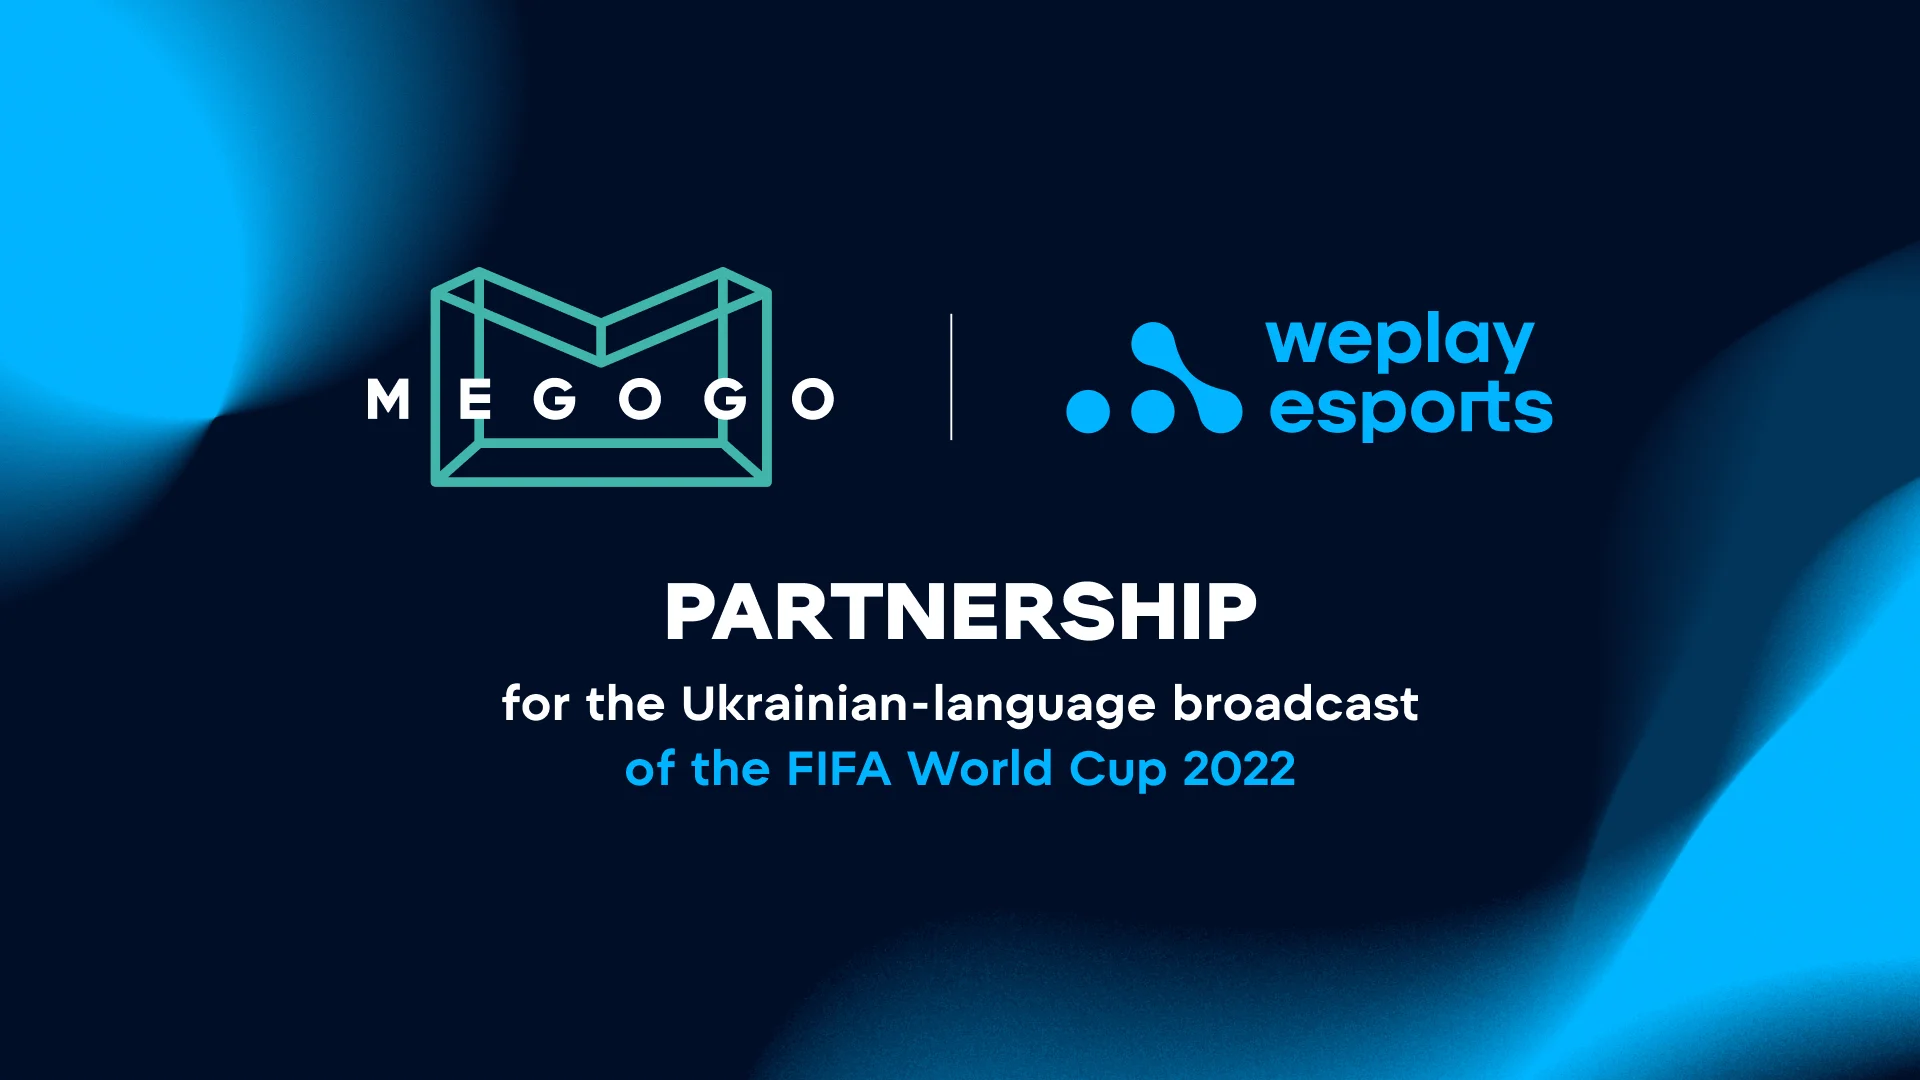 WePlay Esports is the official production partner of the FIFA World Cup 2022 Ukrainian-language broadcast. Visual: WePlay Holding